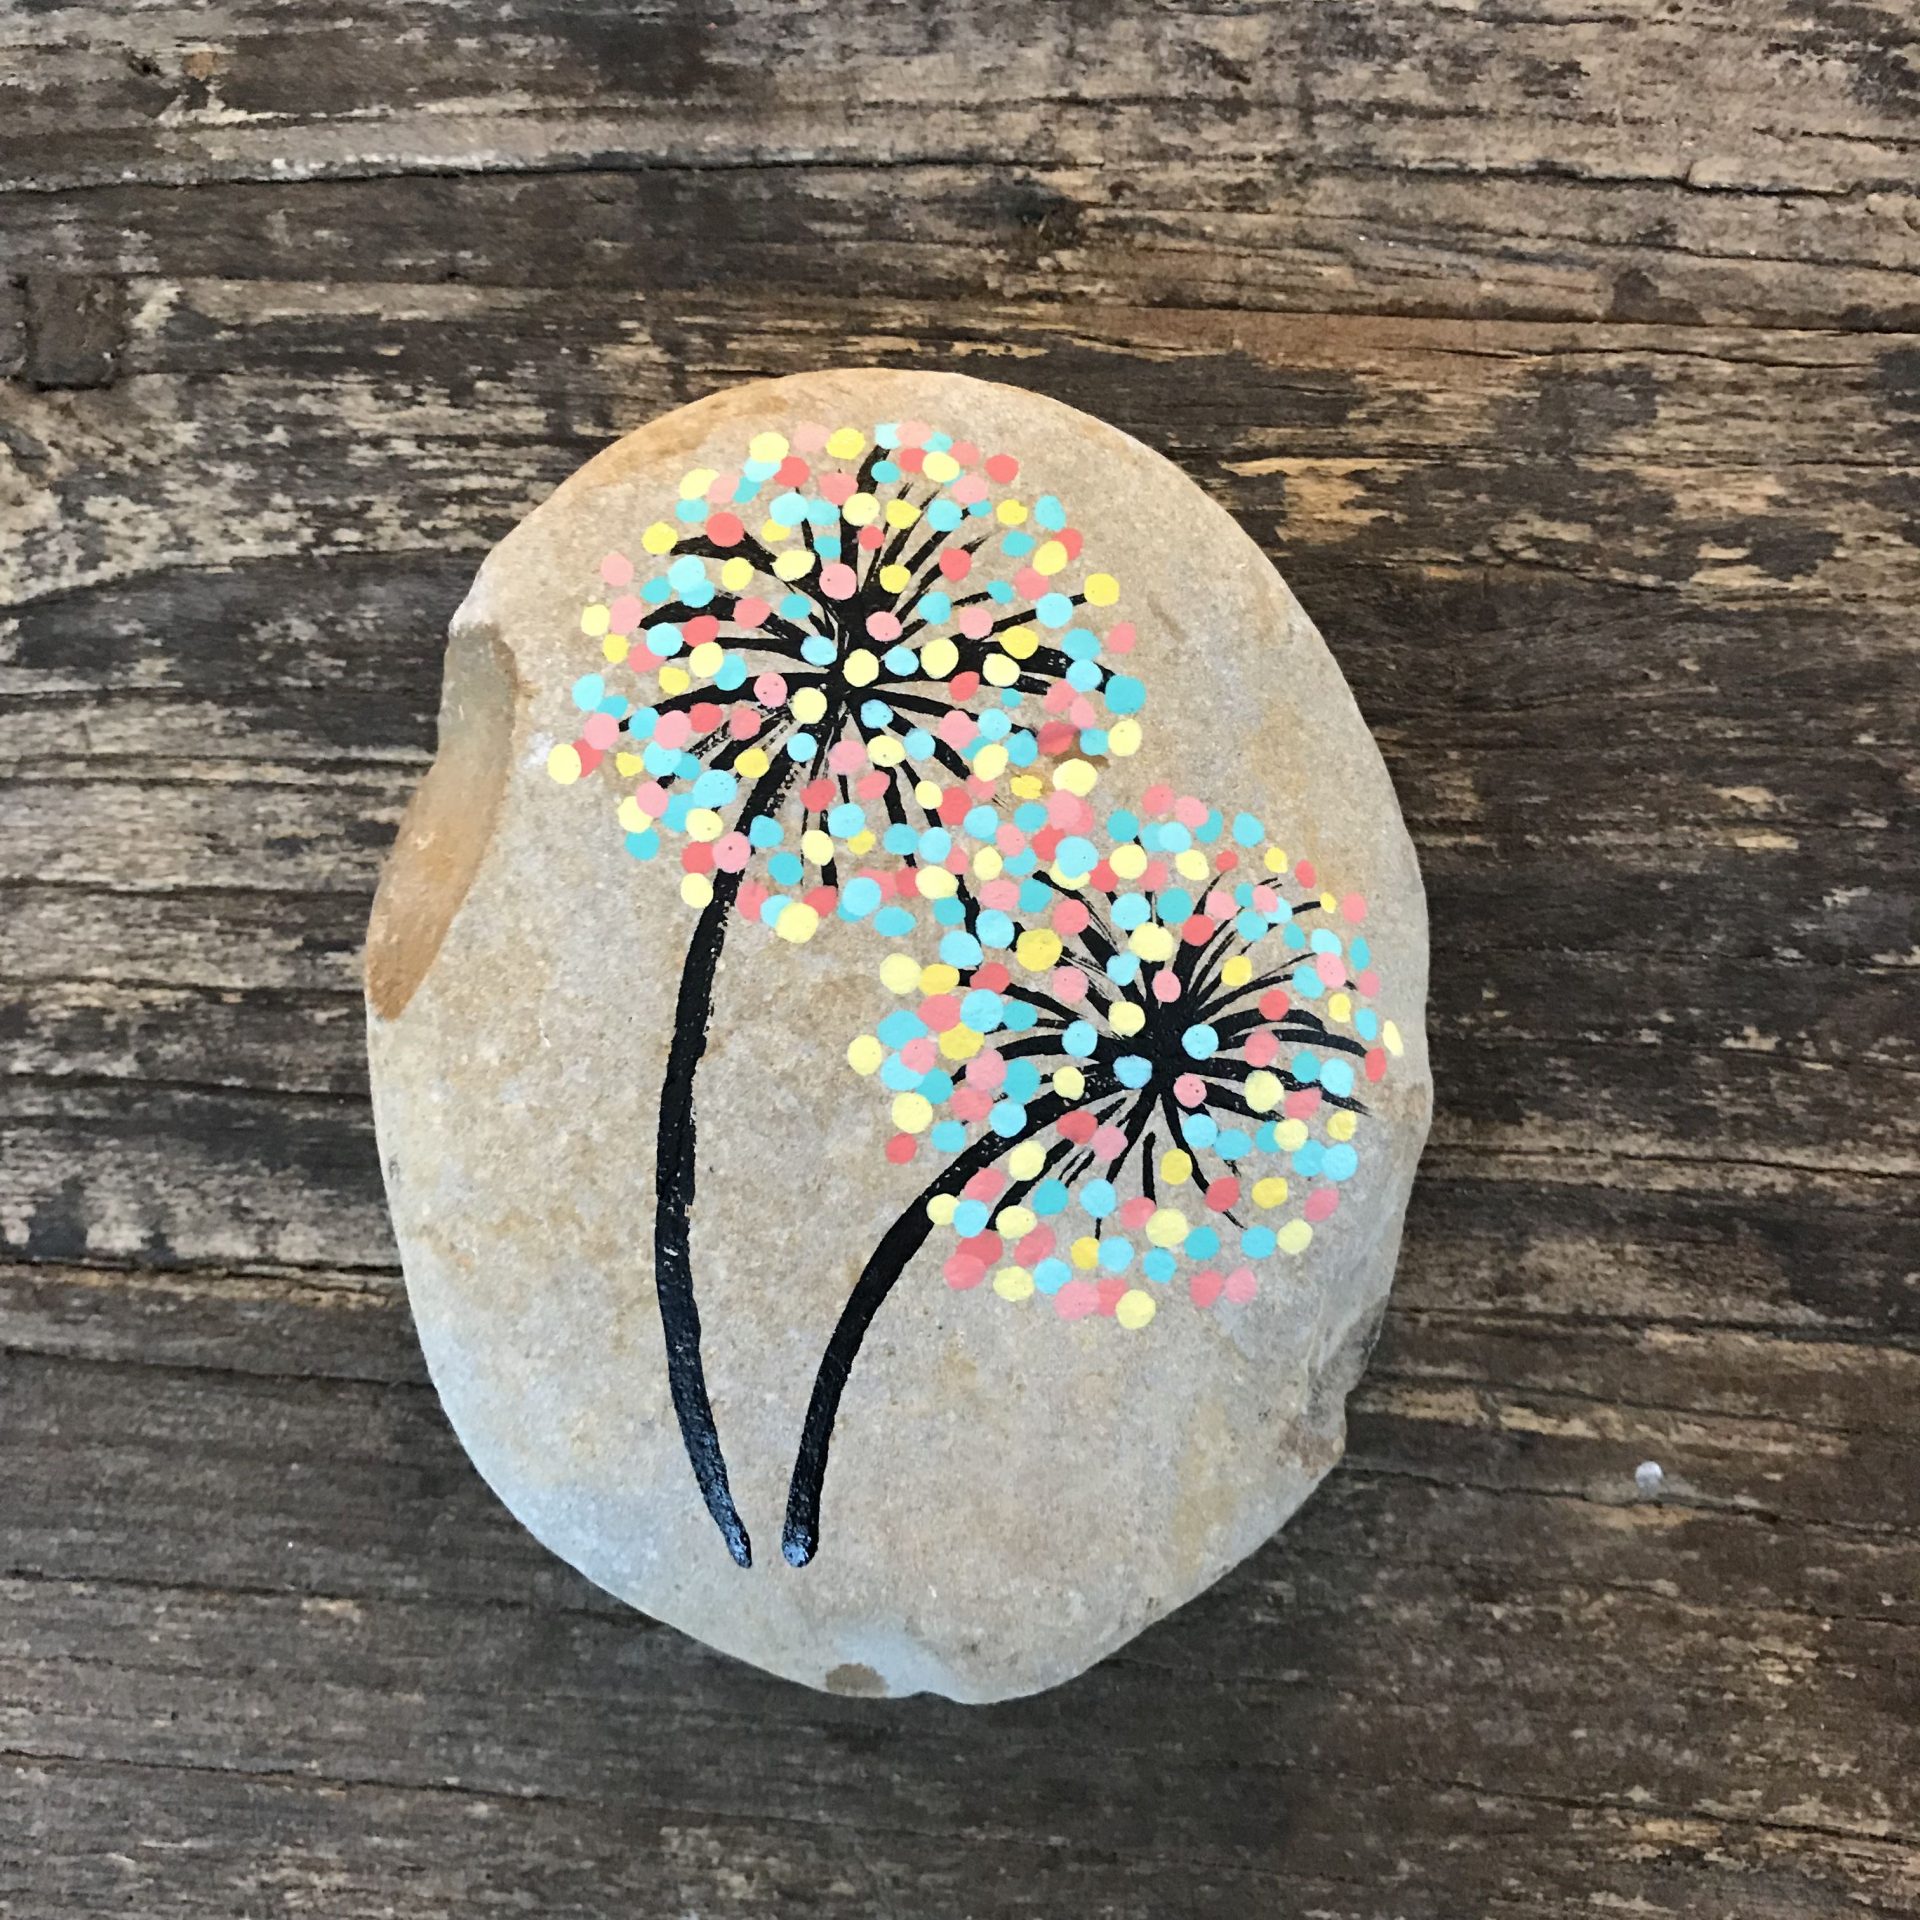 25 Excellent new rock painting ideas You Can Download It Without A Dime ...